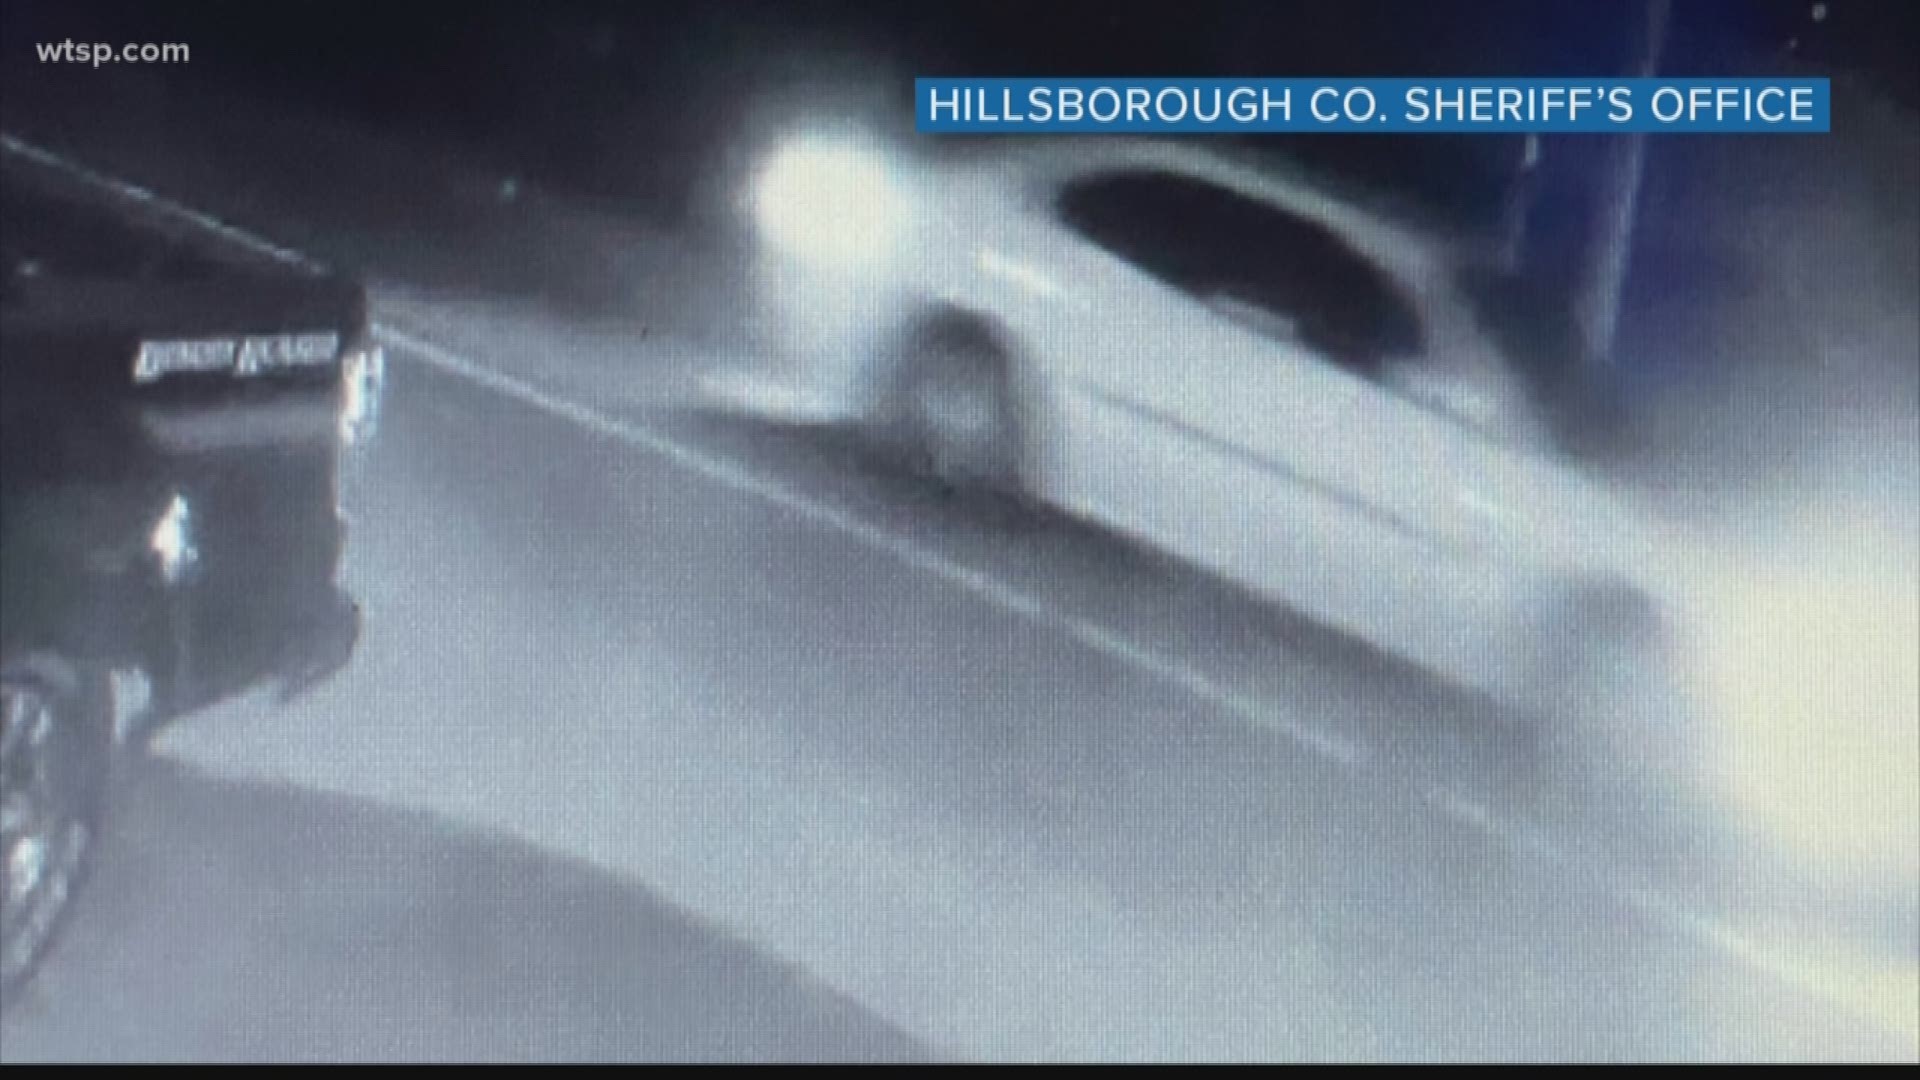 The Hillsborough County Sheriff's Office released pictures of the suspected car involved.